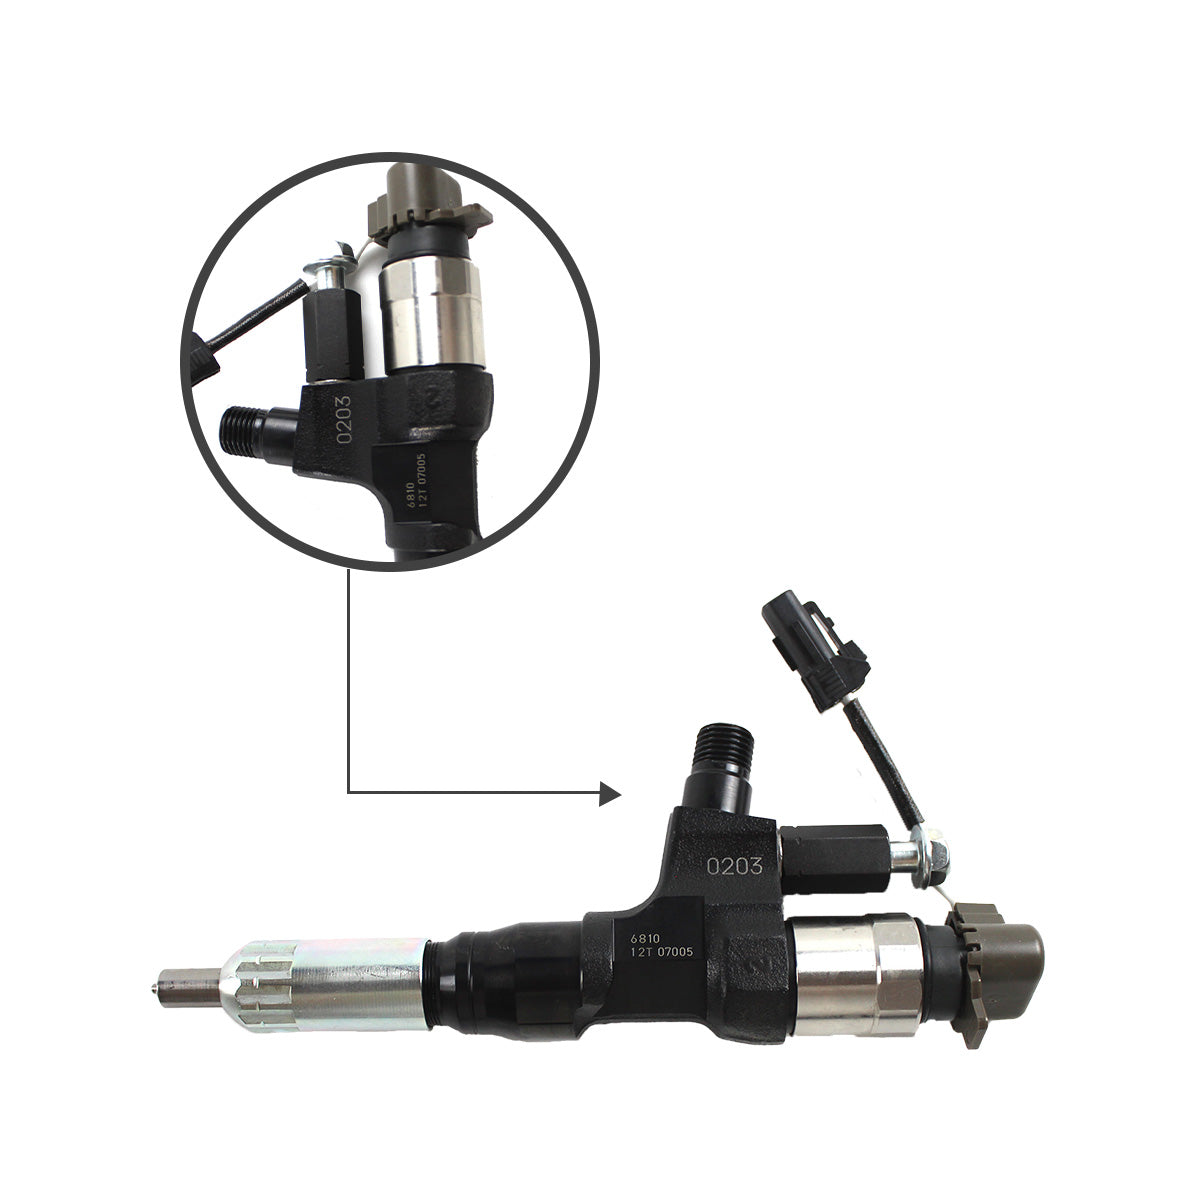 095000-6811 Common Rail Fuel Diesel Injector for Hino J08E Engine - Sinocmp